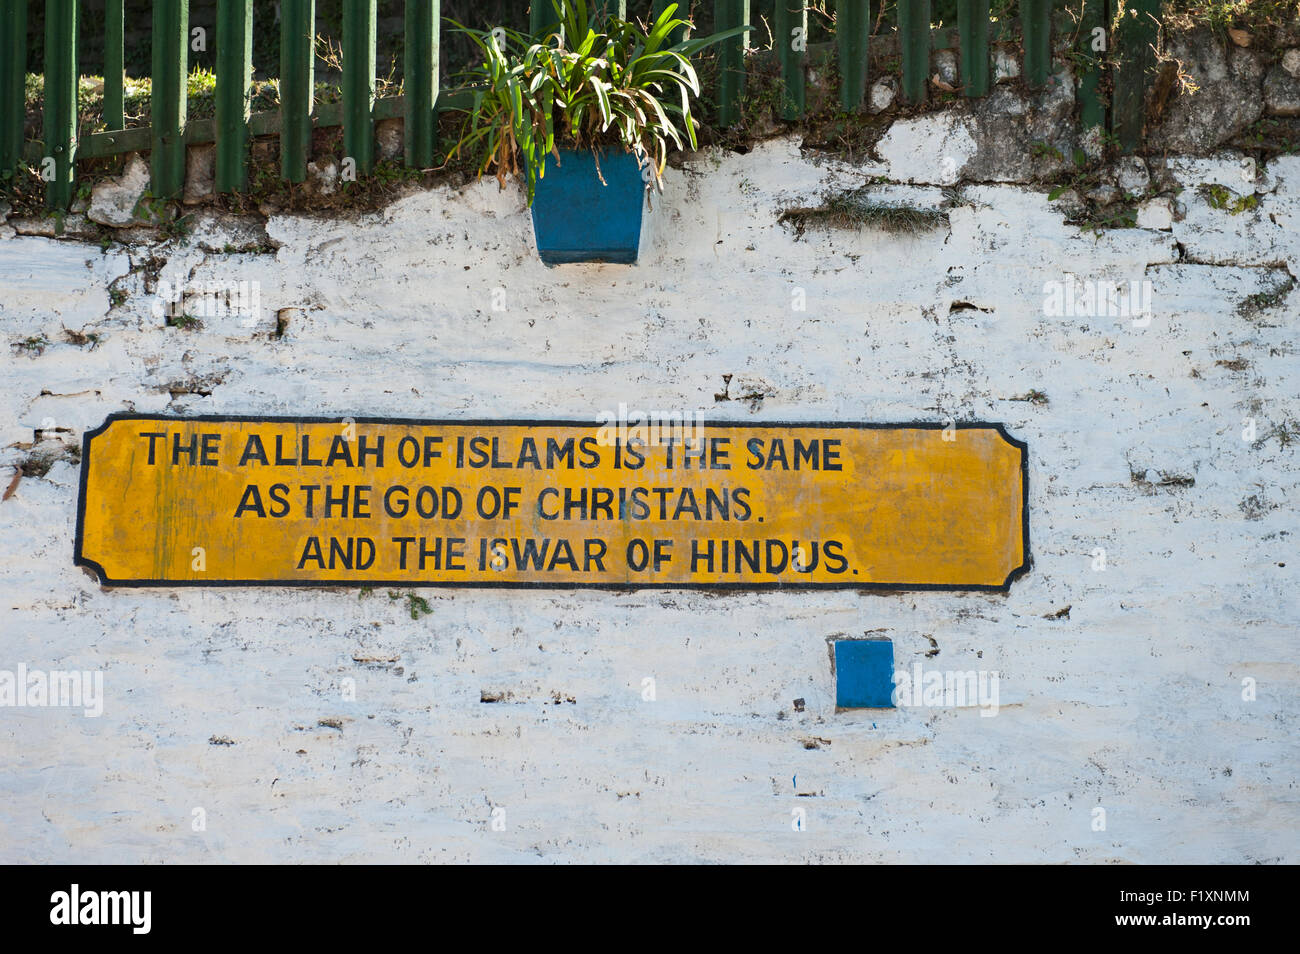 Shimla, Himachal Pradesh, India. The Toy Train railway sign: 'The Allah of Islam is the same as God of Christians and the Iswar of Hindus.' Stock Photo